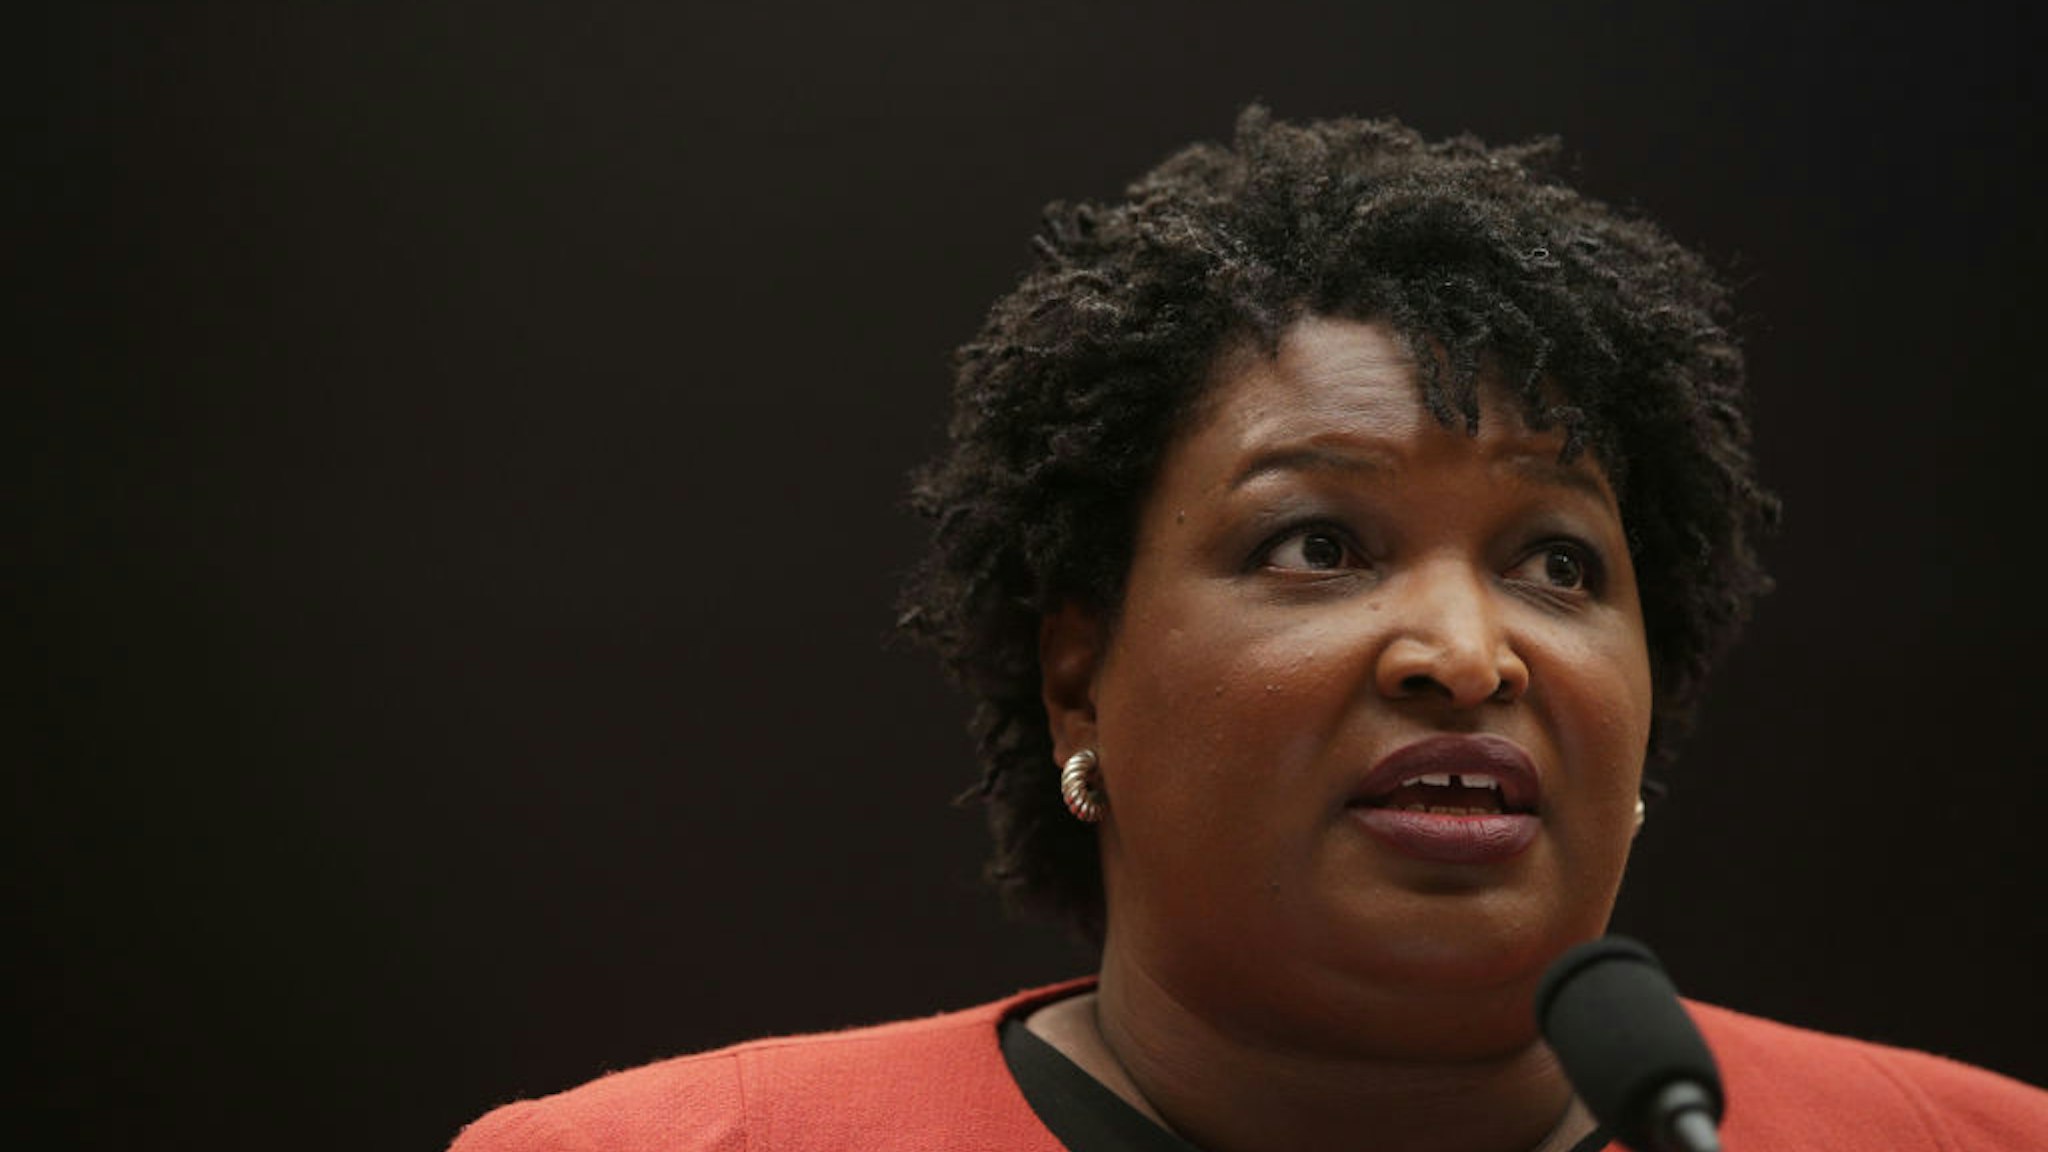 Stacey Abrams testifies during a hearing before the Constitution, Civil Rights and Civil Liberties Subcommittee